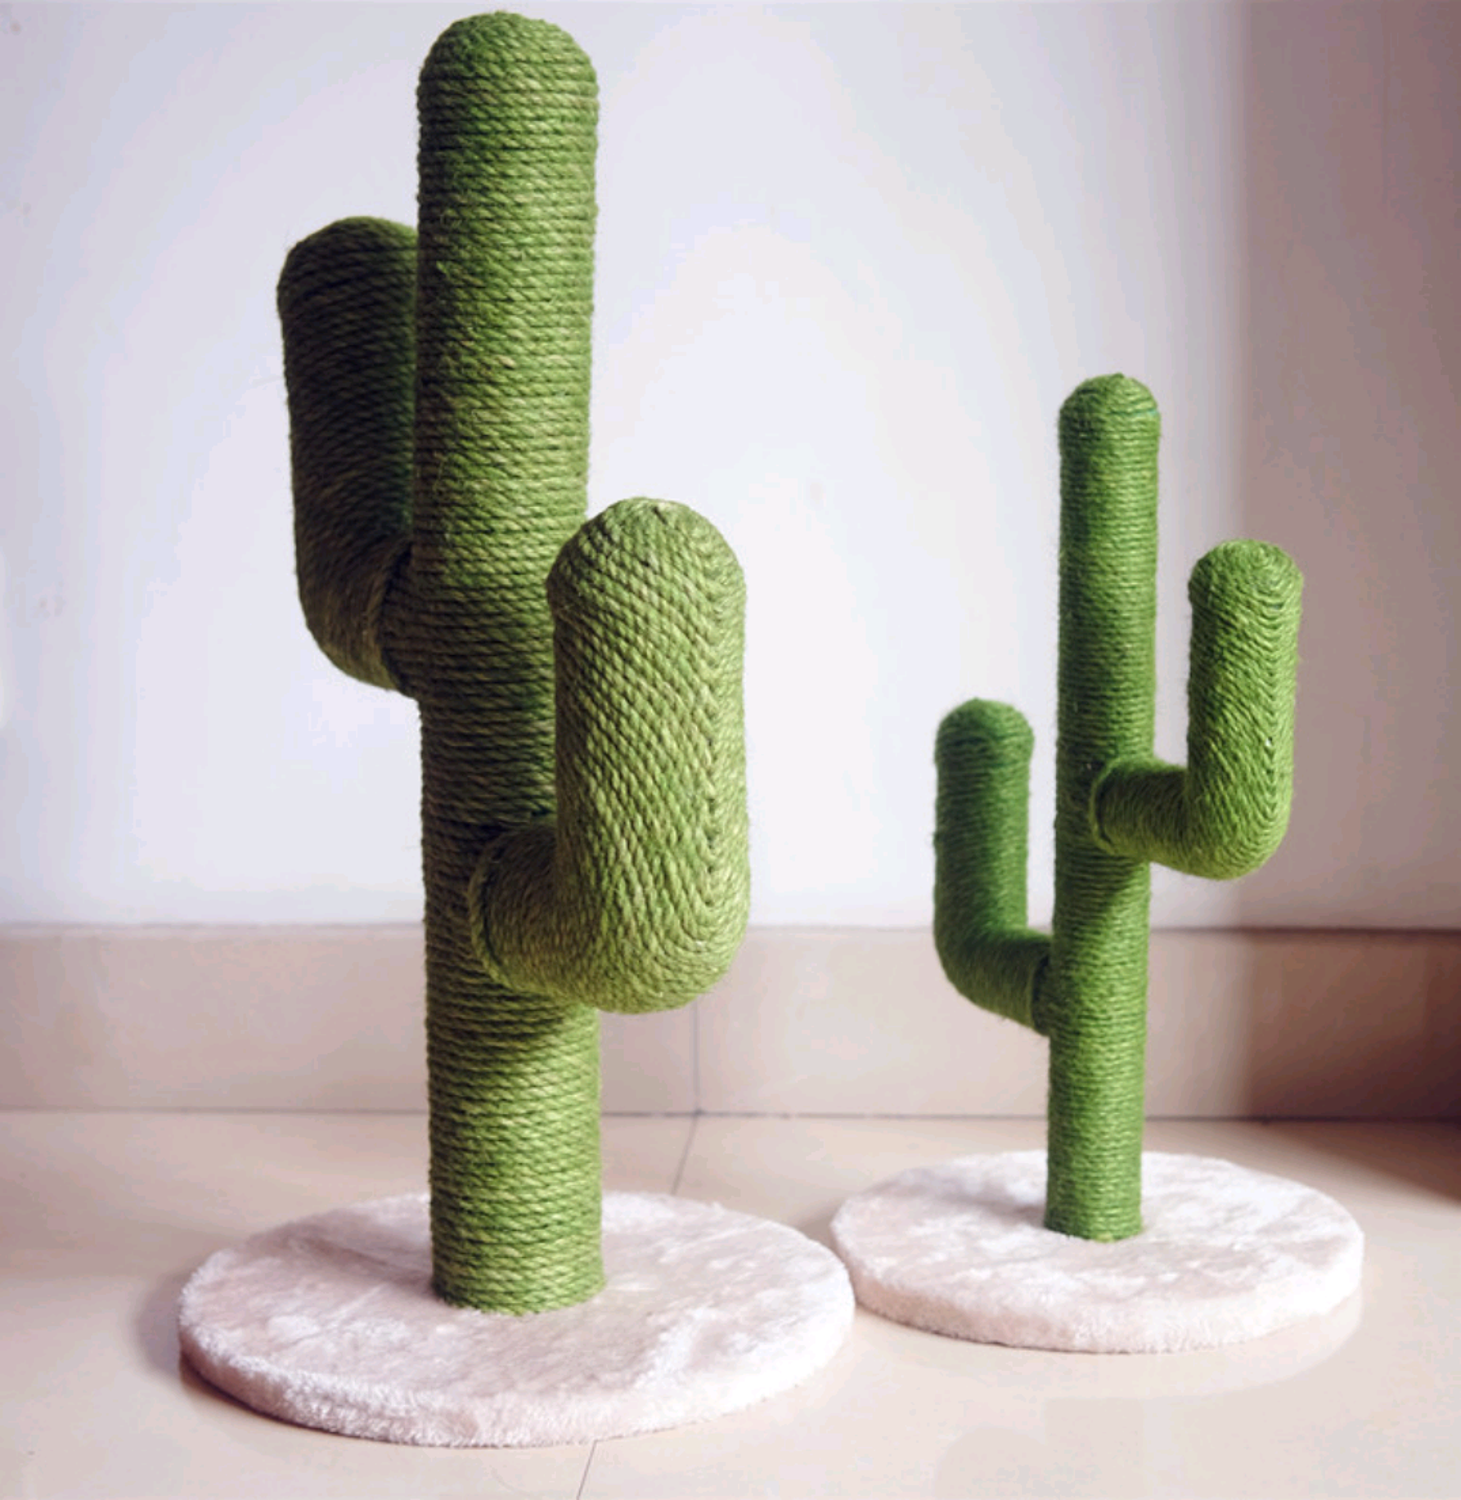 Manufacture Zhejiang Simple Small Cat Furniture Tree Scratch Post Cactus Cat Tree